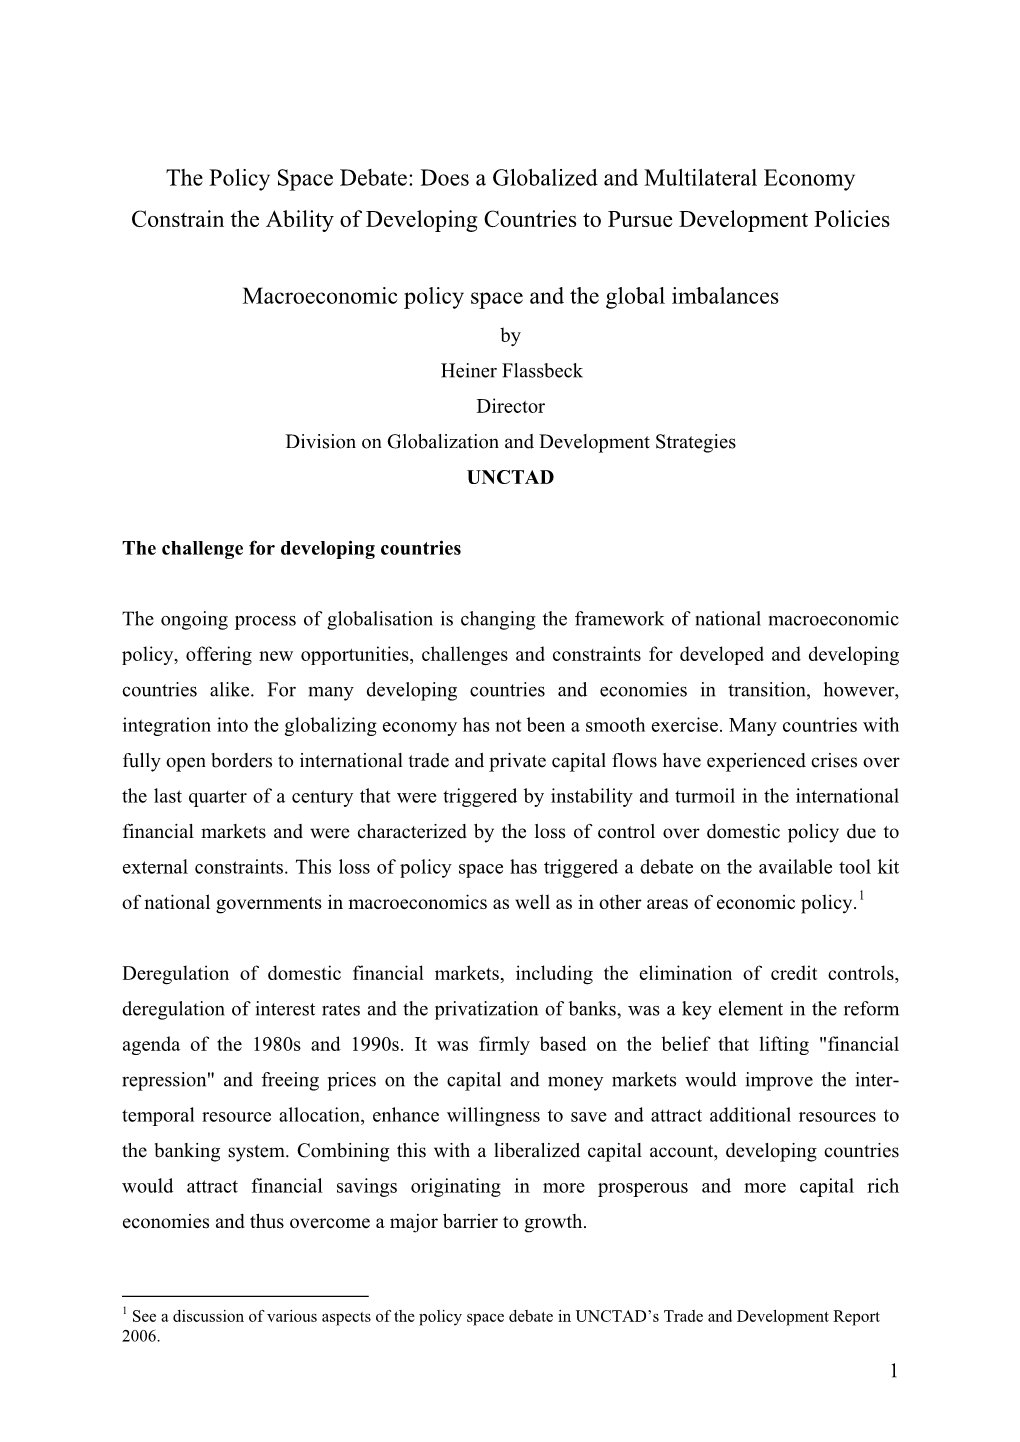 Macroeconomic Policy Space and the Global Imbalances by Heiner Flassbeck Director Division on Globalization and Development Strategies UNCTAD